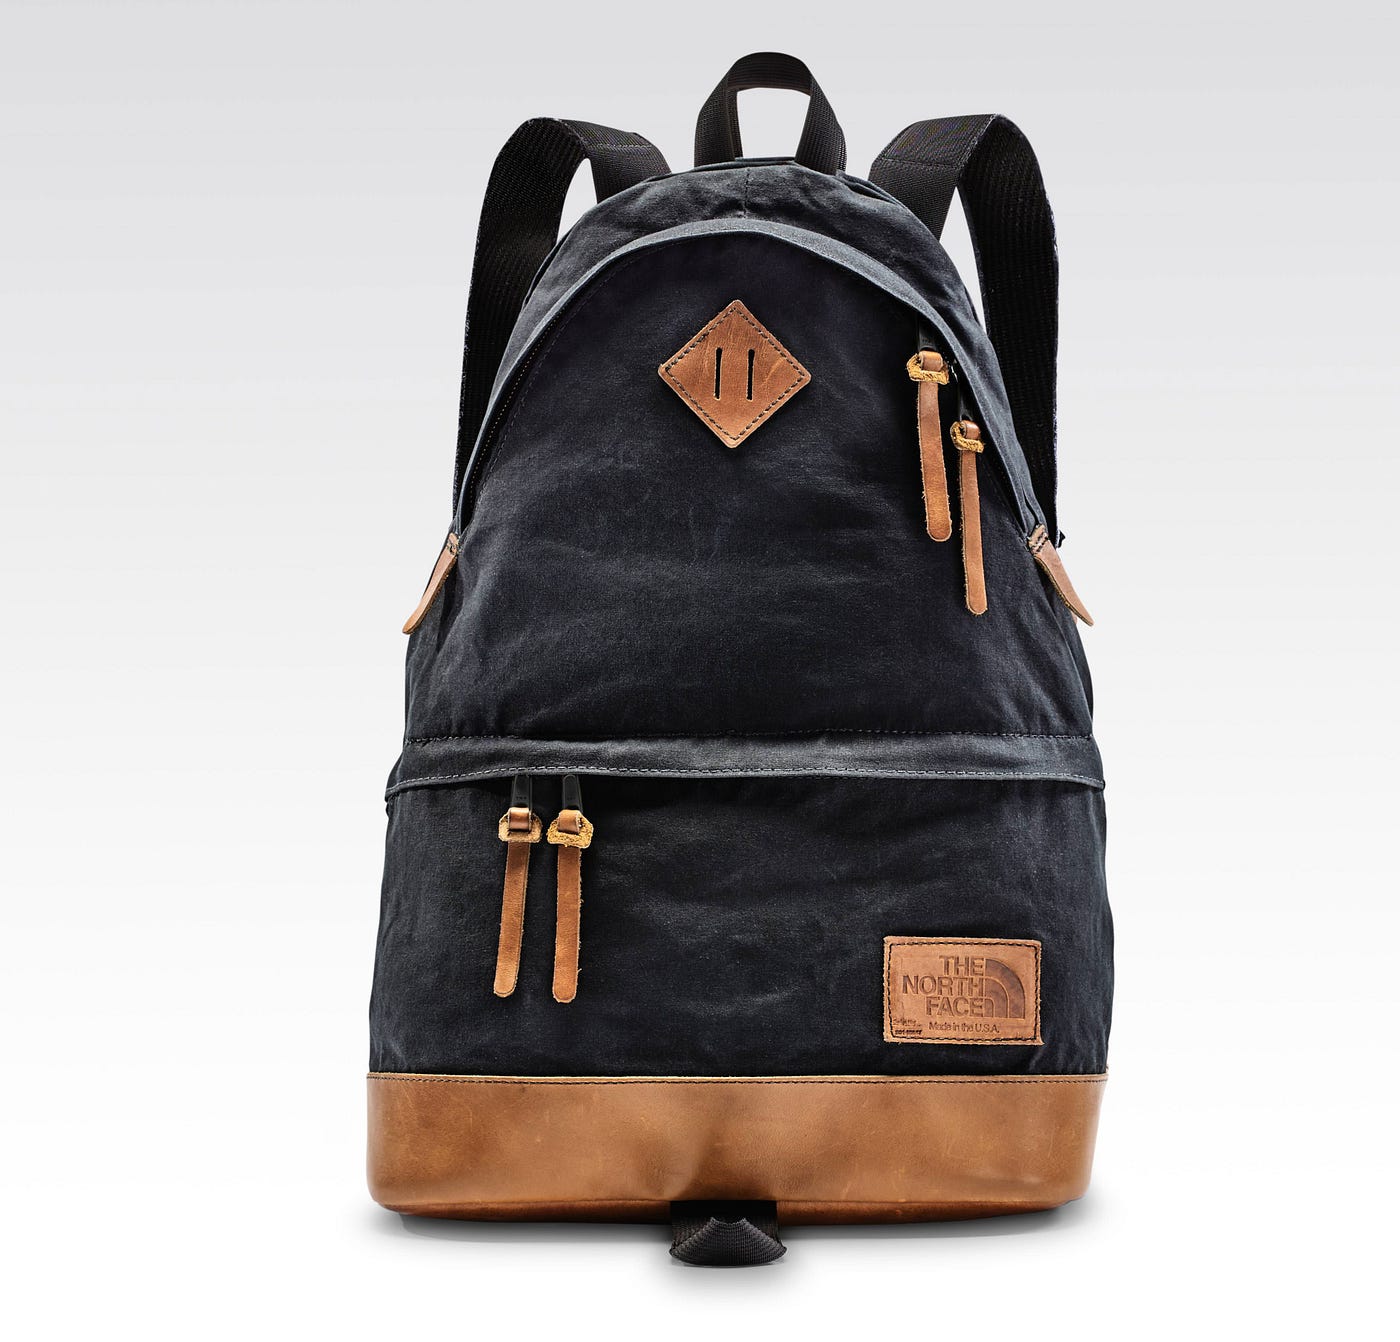 Back to Our Roots. The Original Day Pack | by The North Face | The North  Face | Medium